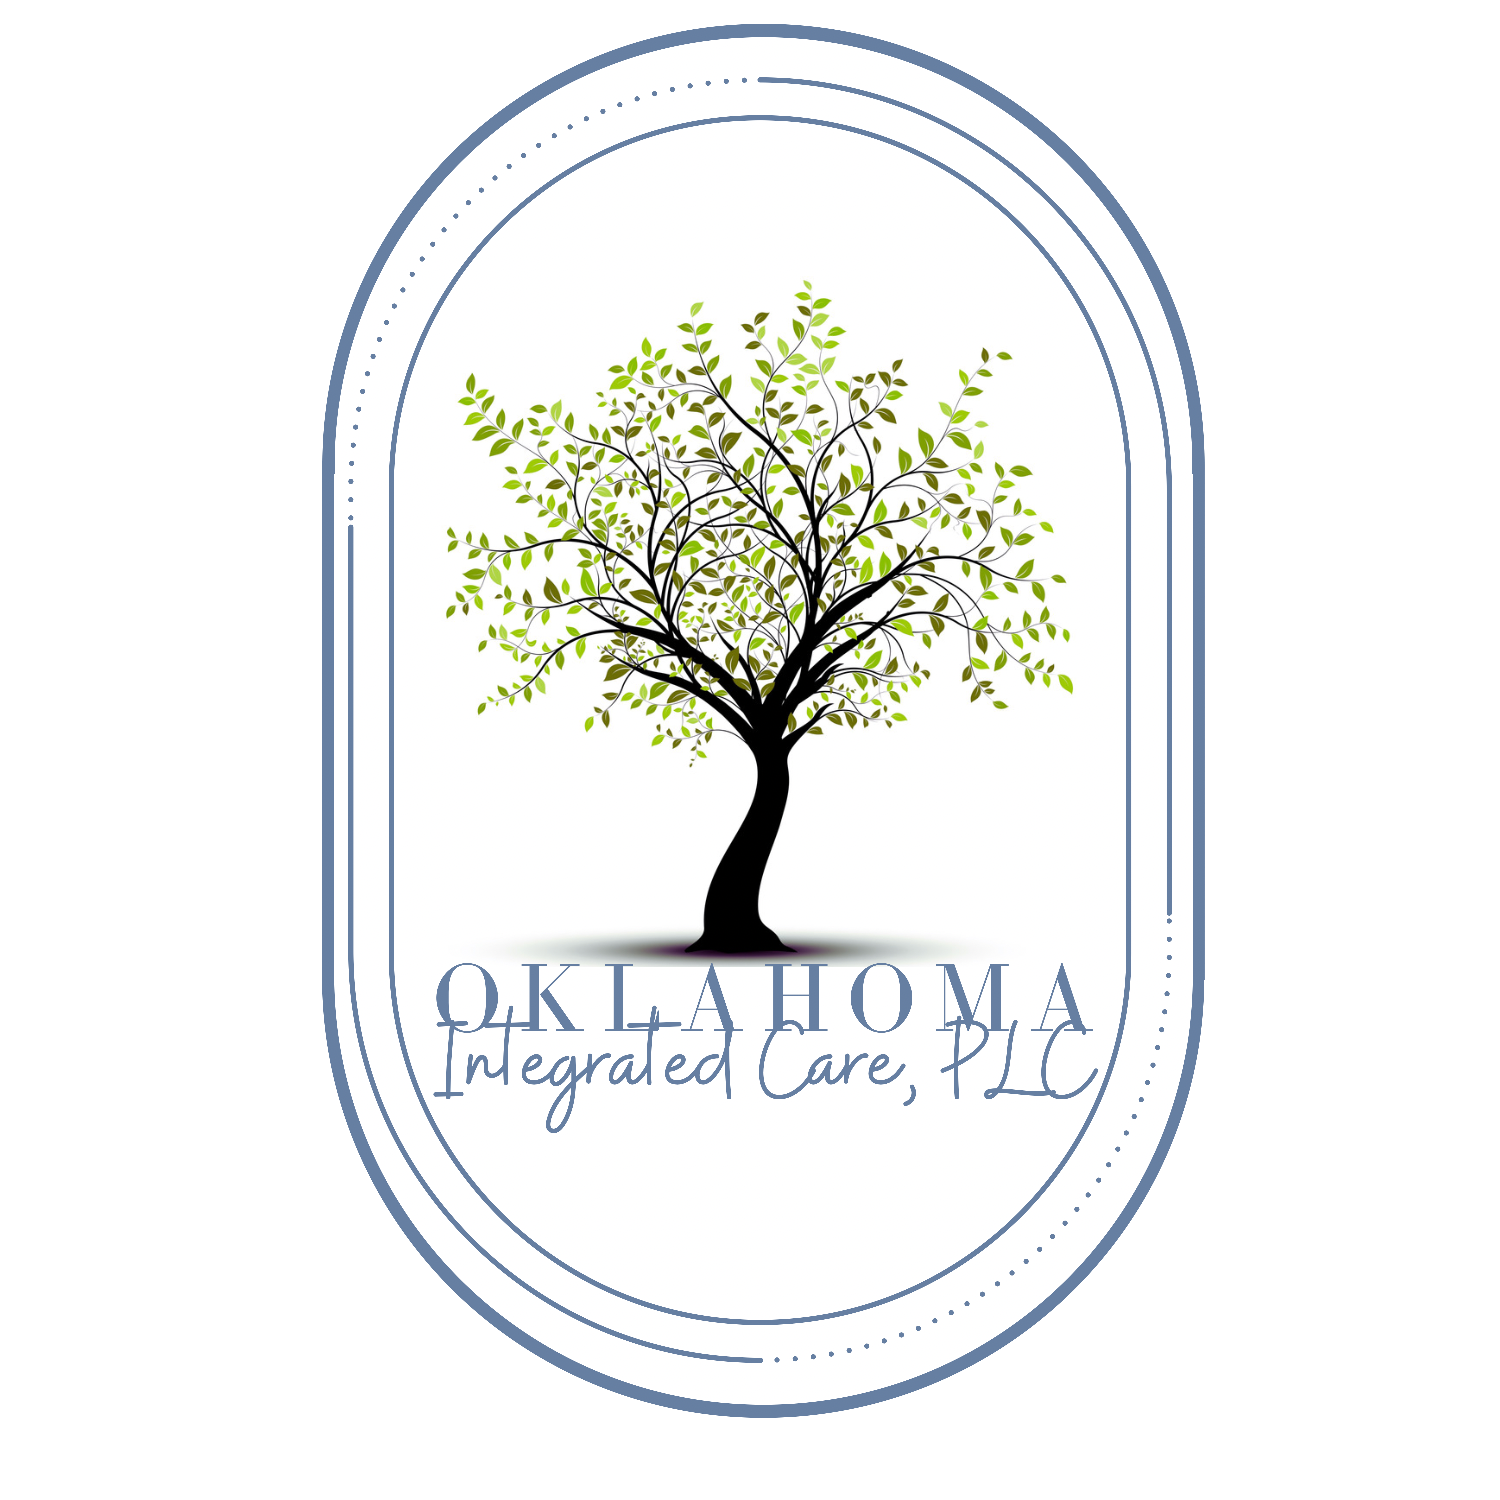 Oklahoma Integrated Care, PLC - Ardmore, OK Mental Health | Family Practice | Med Mngmt | Therapy